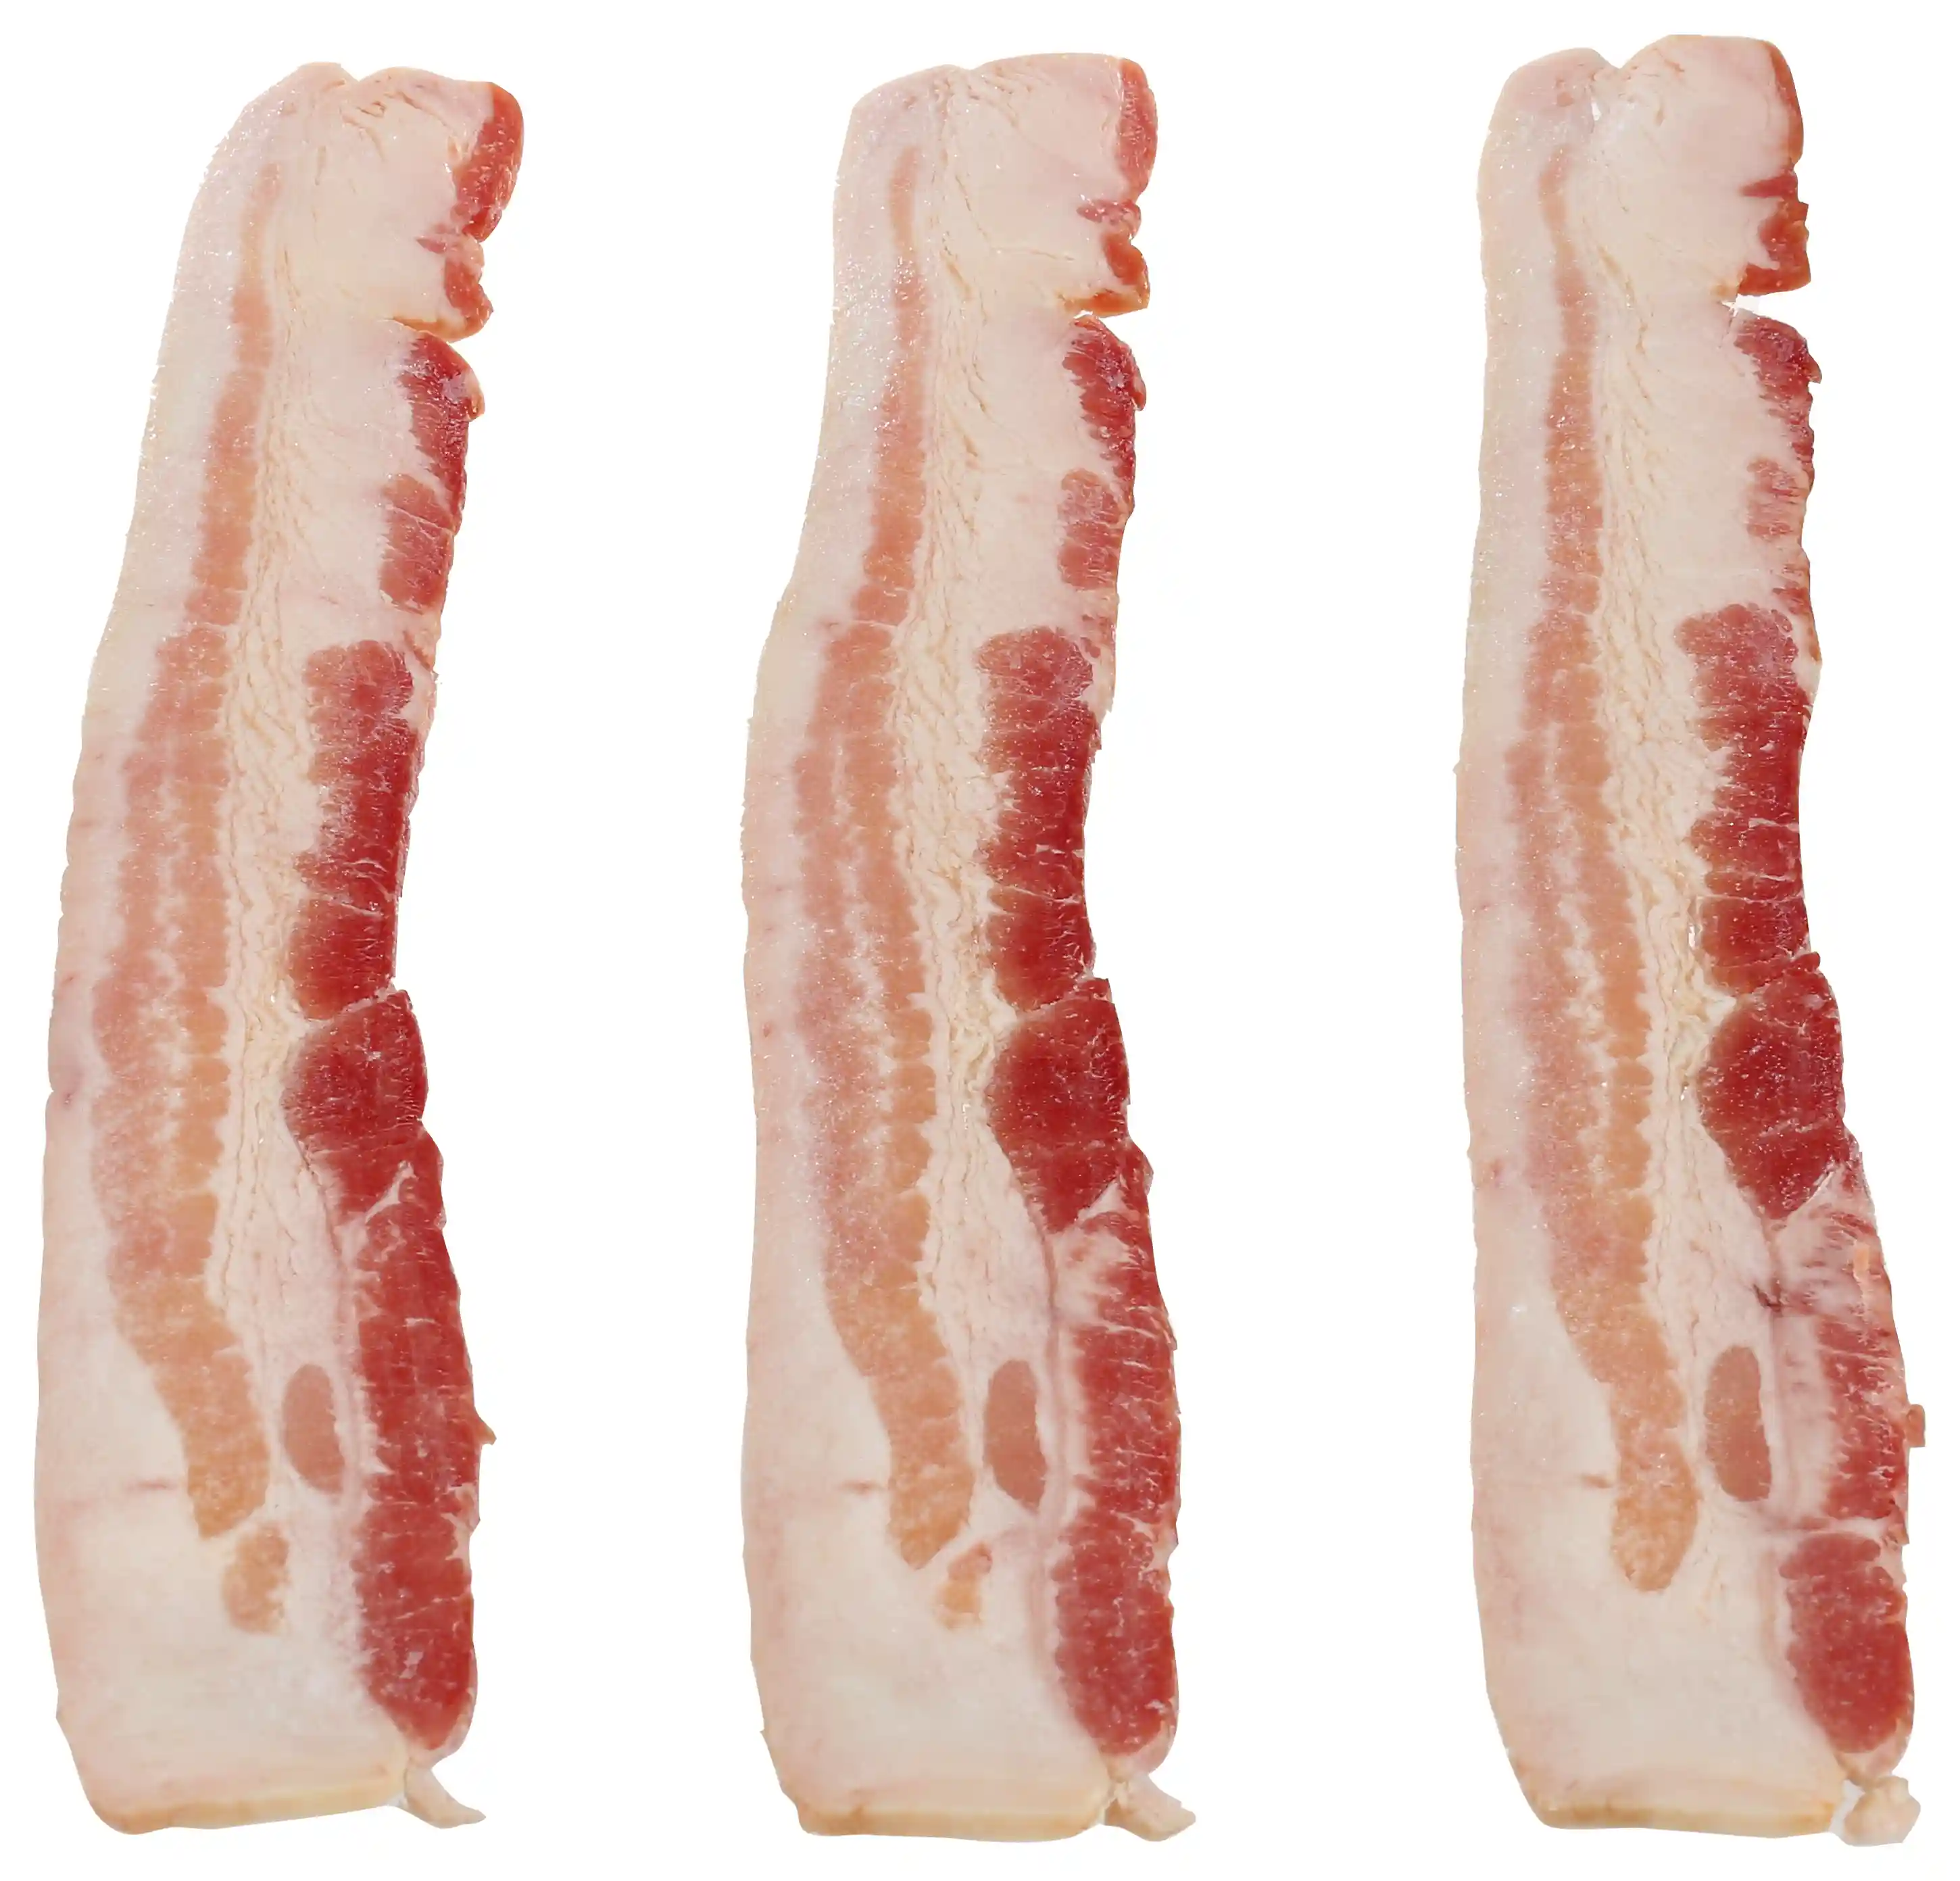 Wright® Brand Naturally Hickory Smoked Thick Sliced Bacon, Bulk, 30 Lbs, 10-14 Slices per Pound, Frozen_image_11